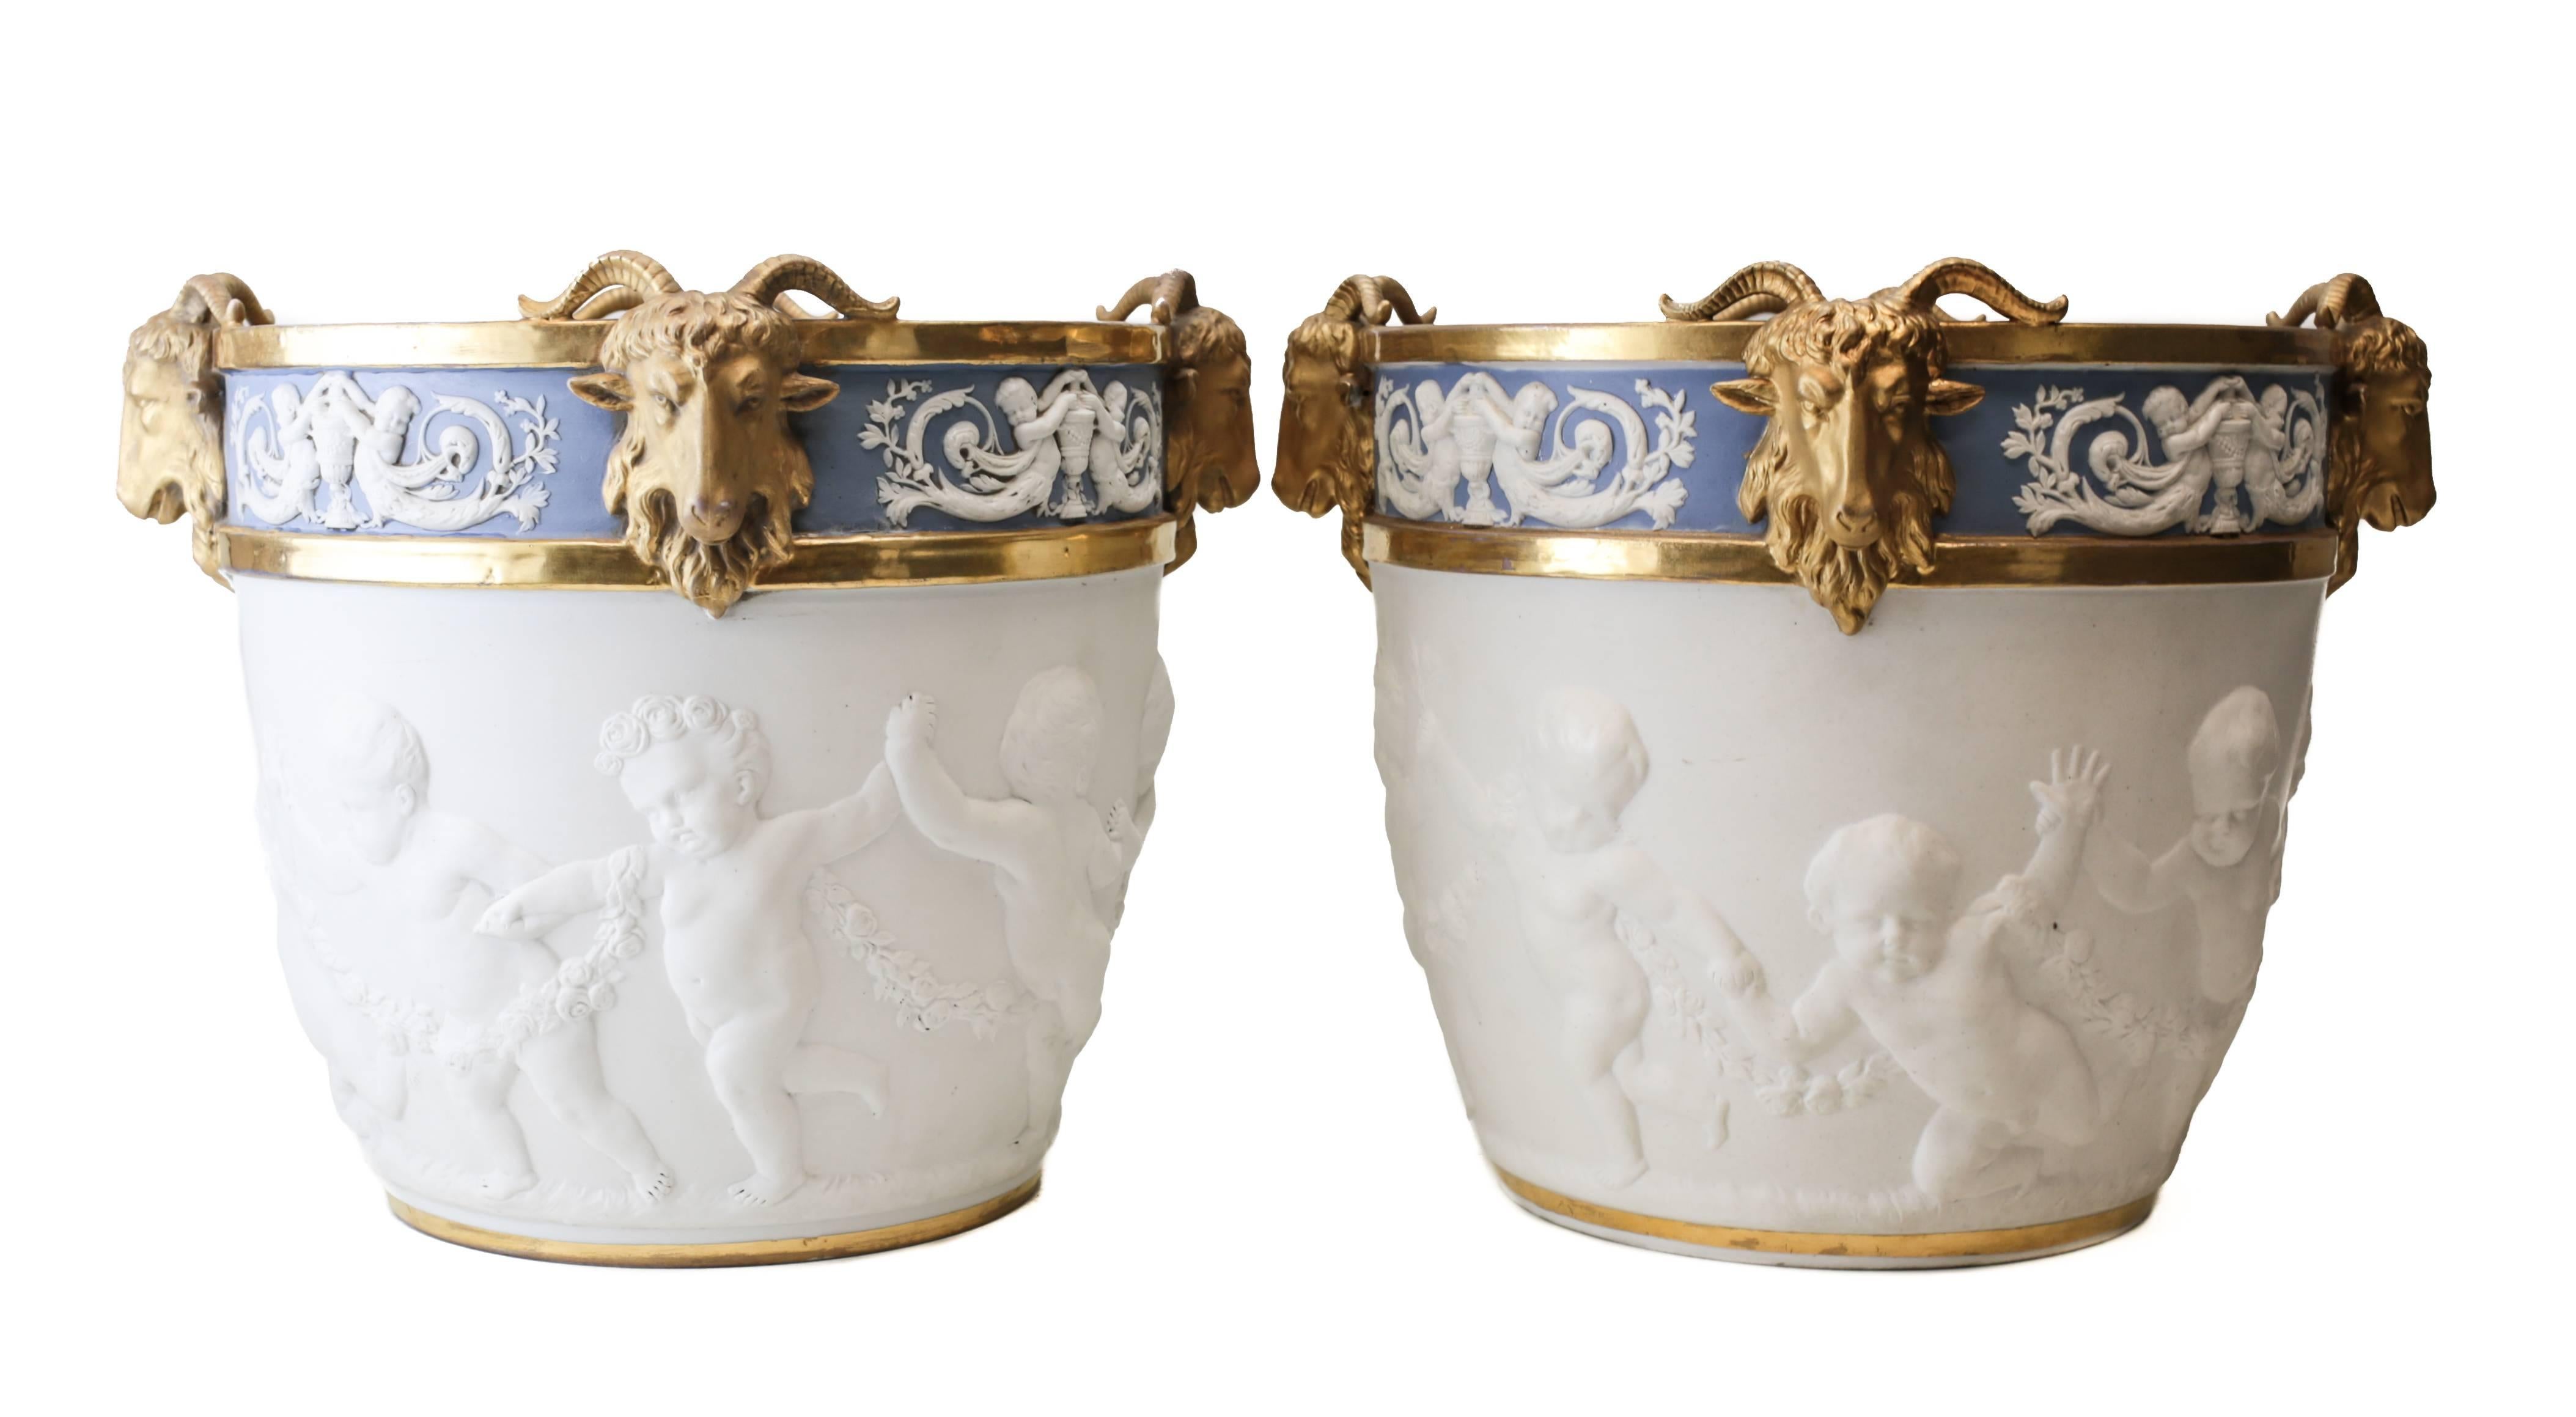 A large and attractive matching pair of cache pots from Sevres of the late 19th century. Charming hand chased cherubs holding hands while frolicking on the bisque central finish. The top rim of the cache pot has more cherubs with four applied gilt